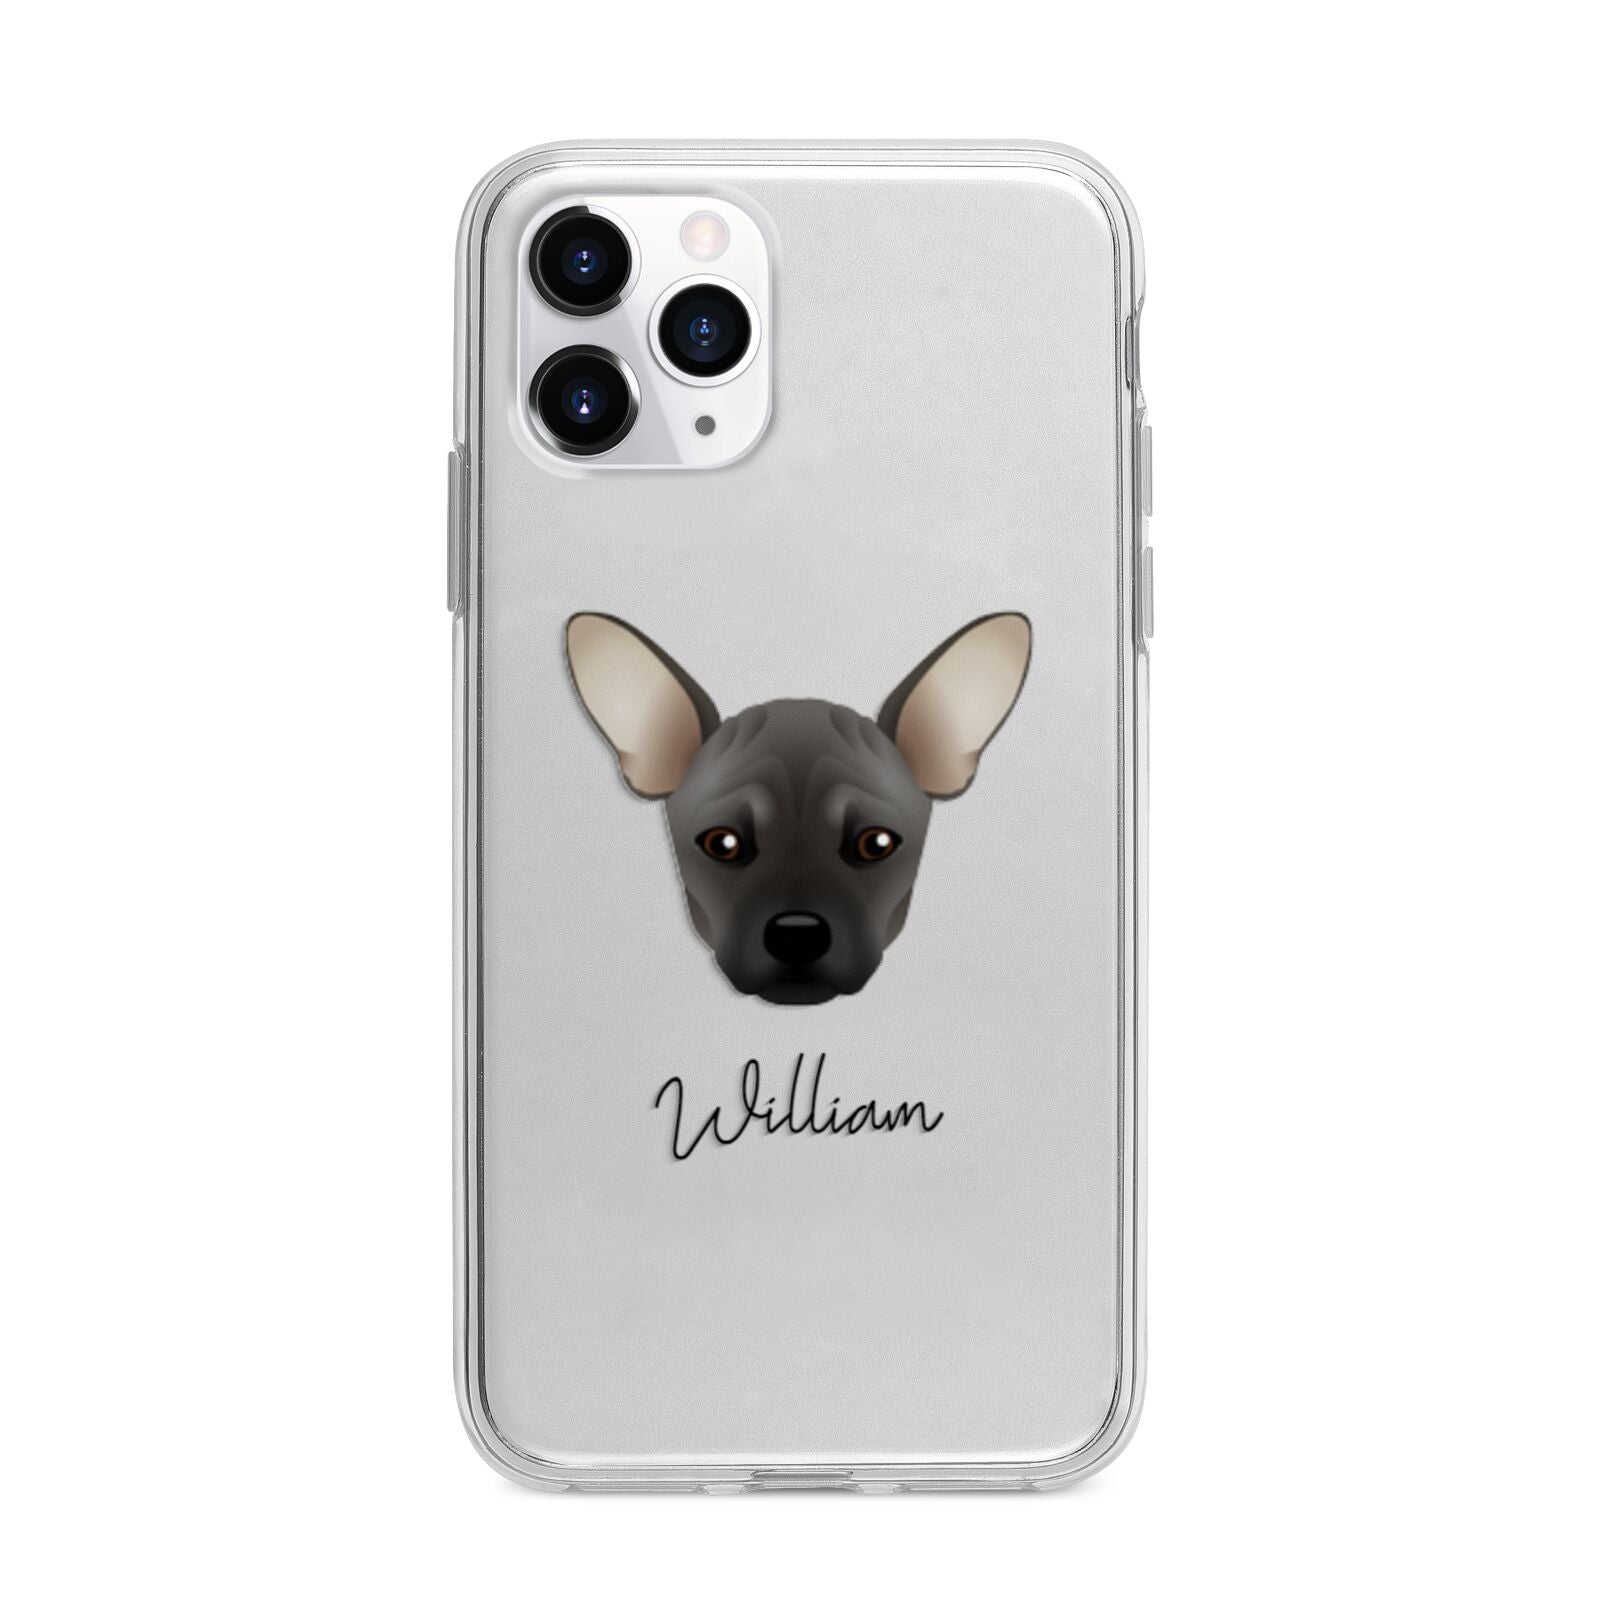 French Pin Personalised Apple iPhone 11 Pro in Silver with Bumper Case